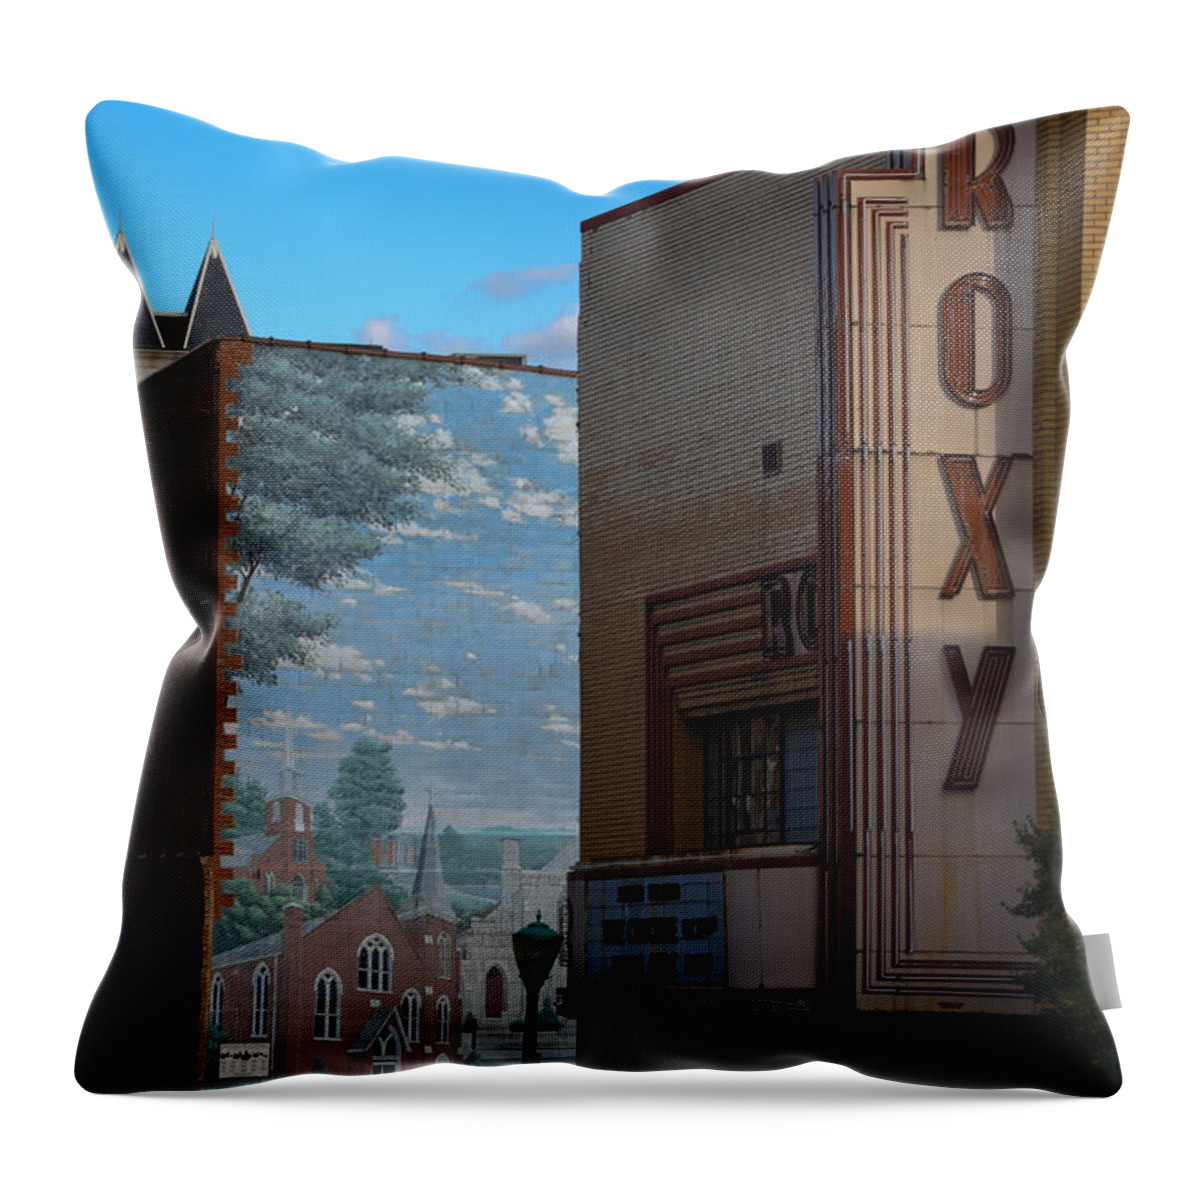 Clarksville Throw Pillow featuring the photograph Roxy Theater and Mural by Ed Gleichman